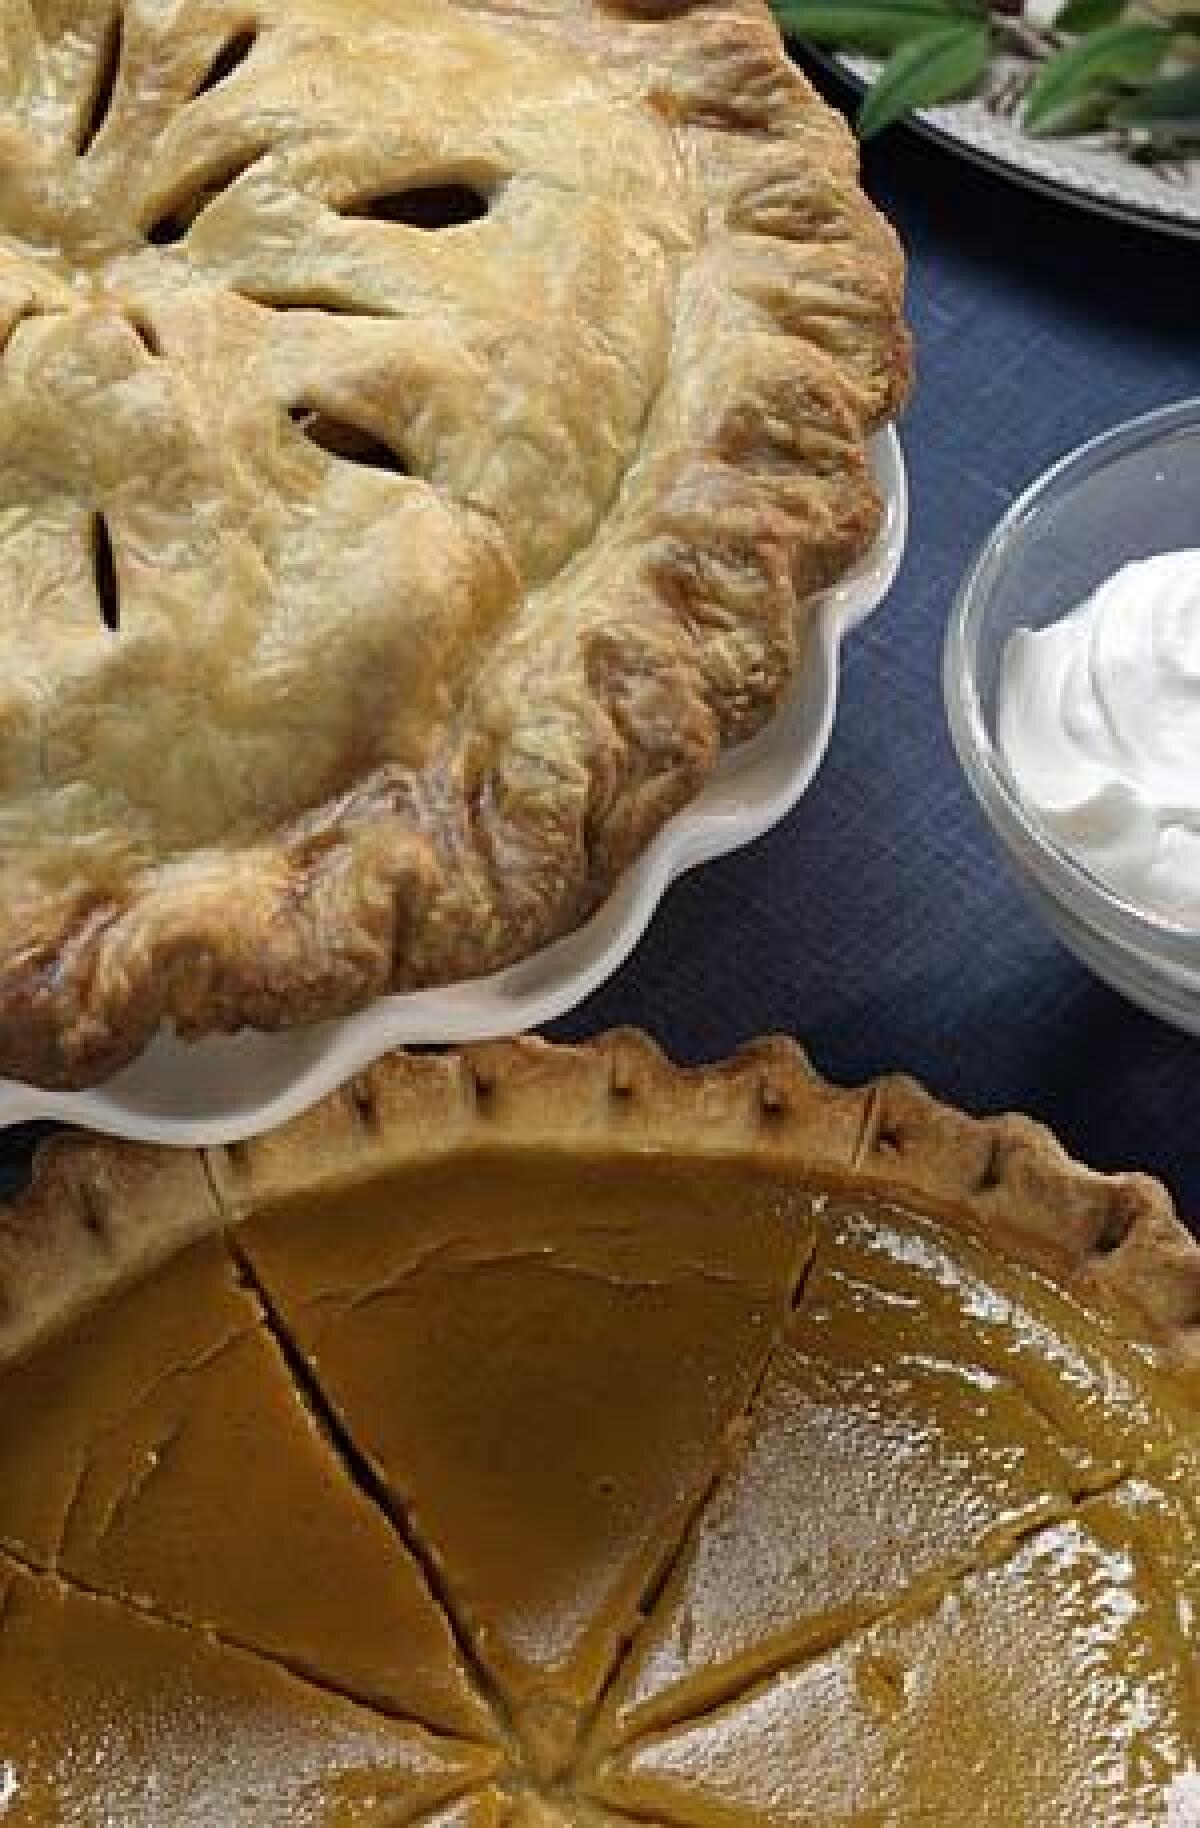 You can chill the crust overnight, but apple and pumpkin pies are best the day they're made.